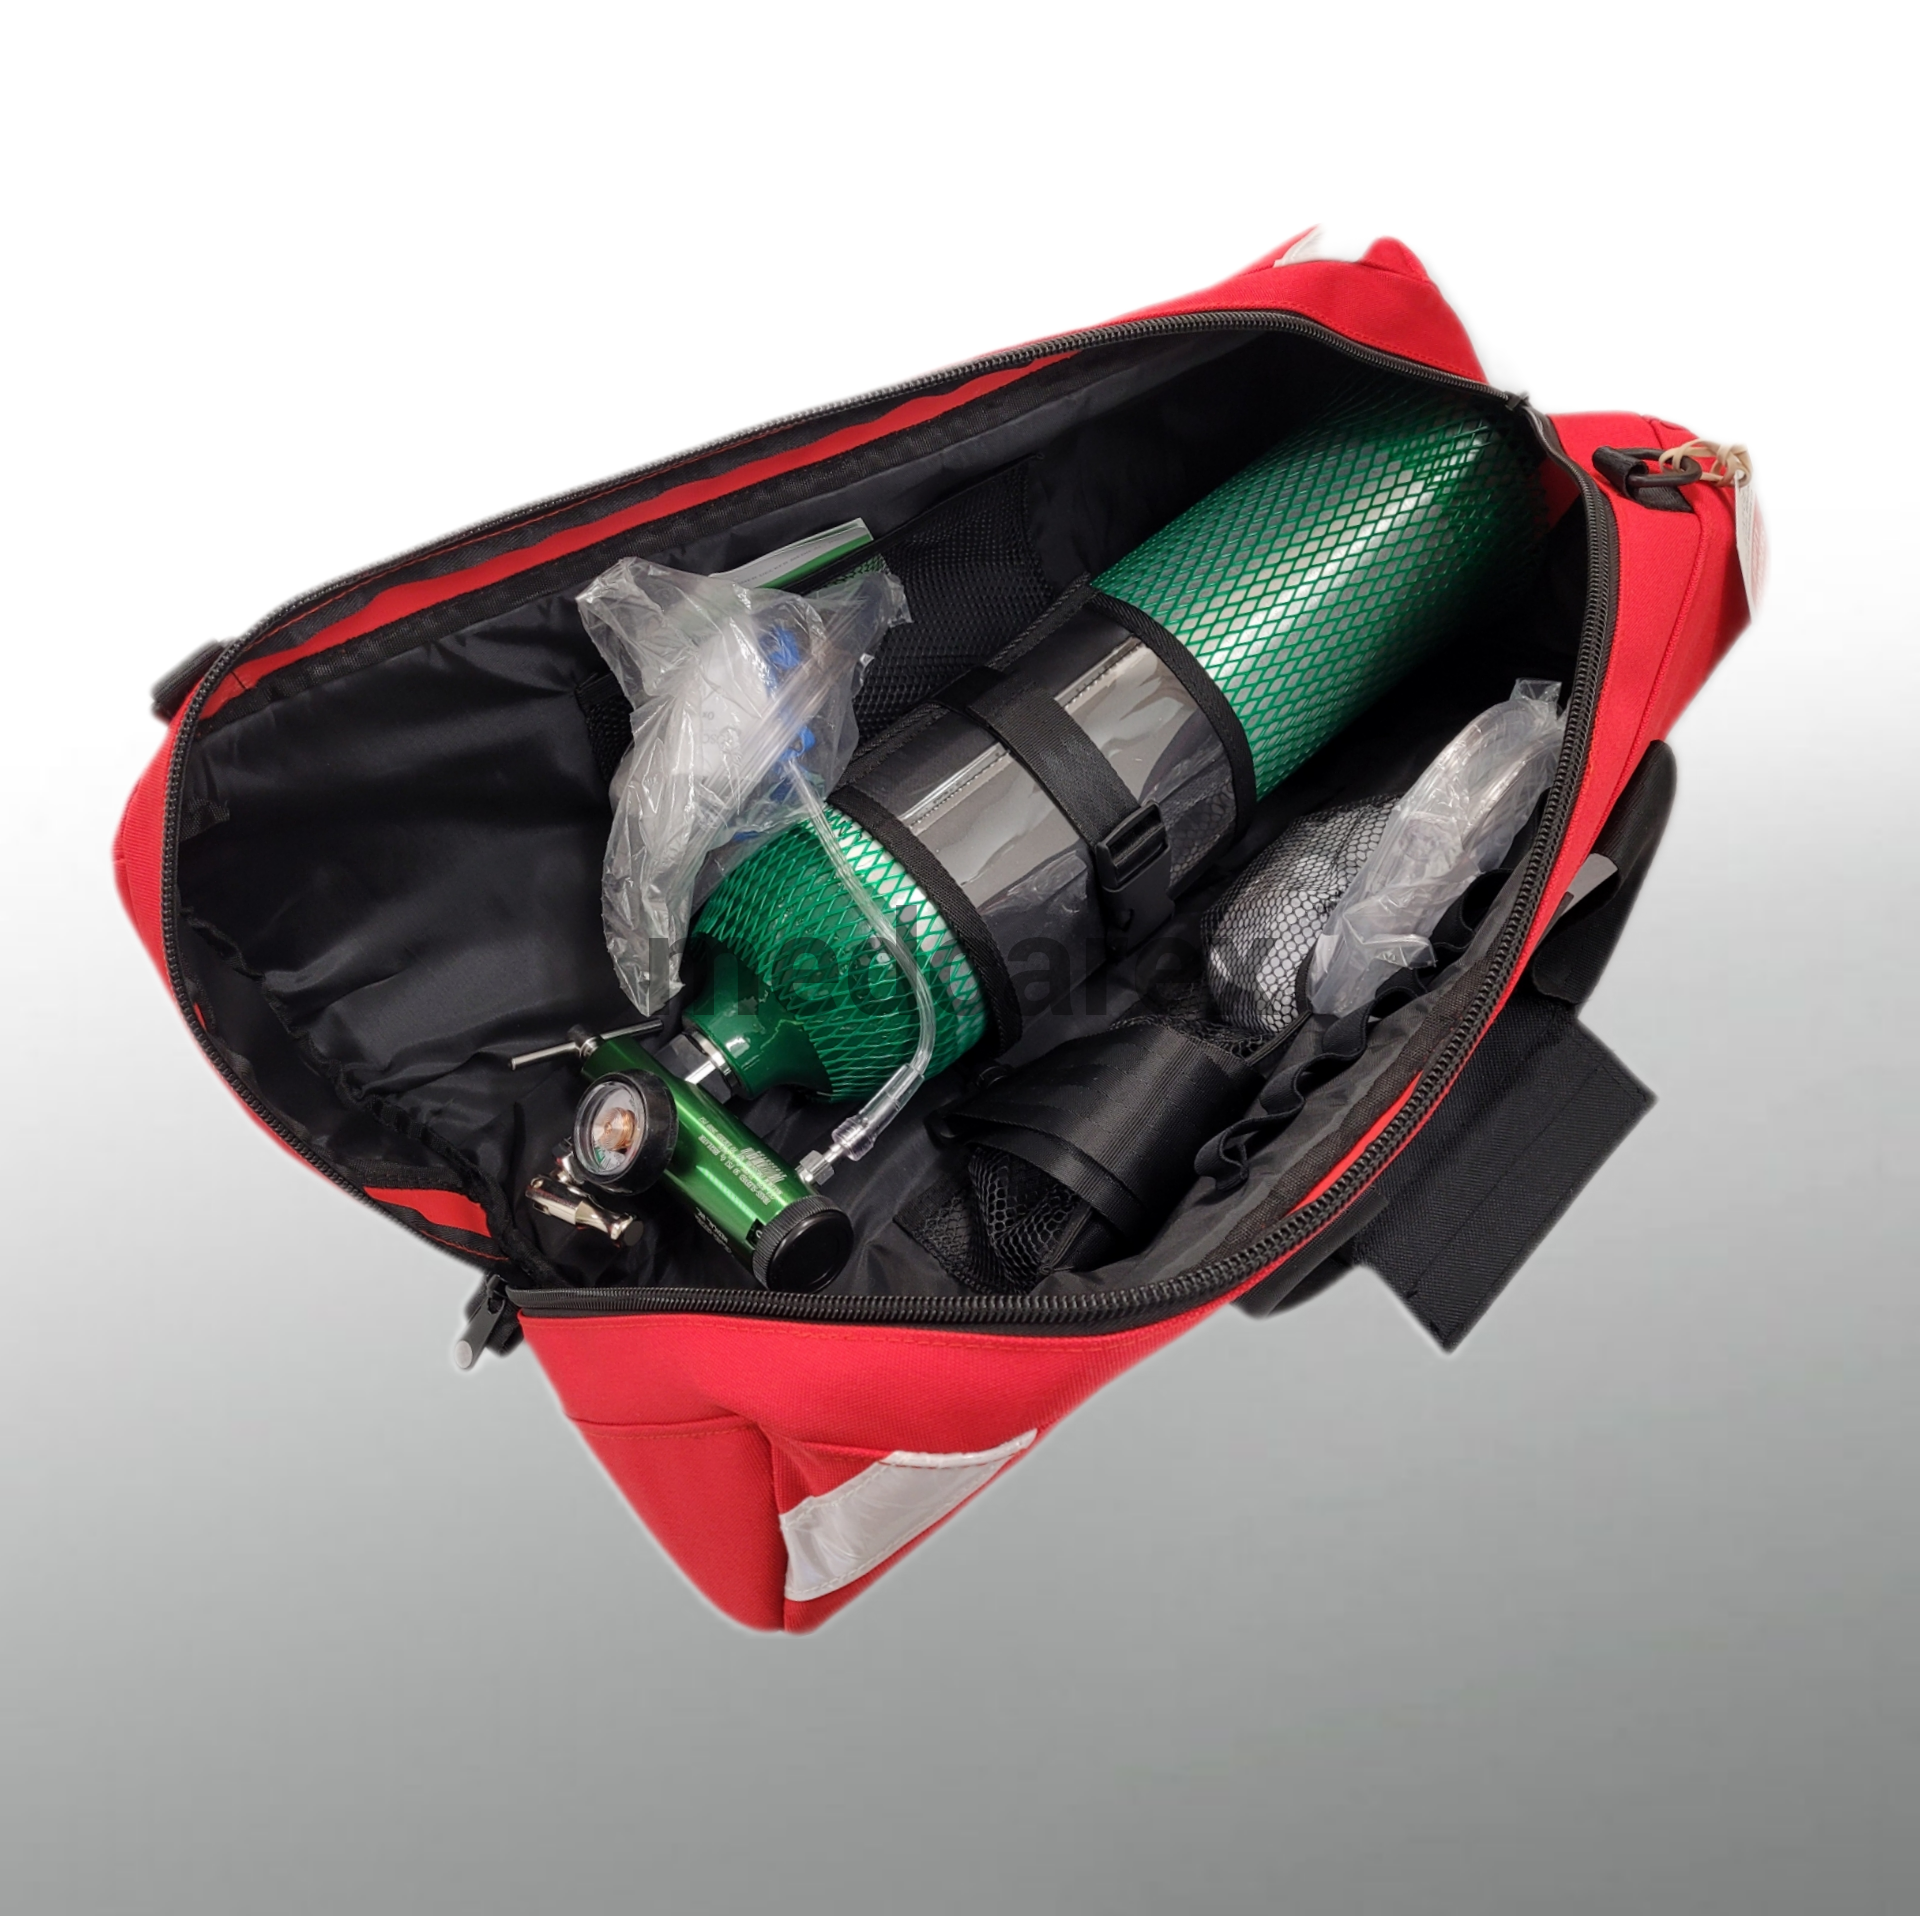 Oxygen tank kit with D cylinder - 0